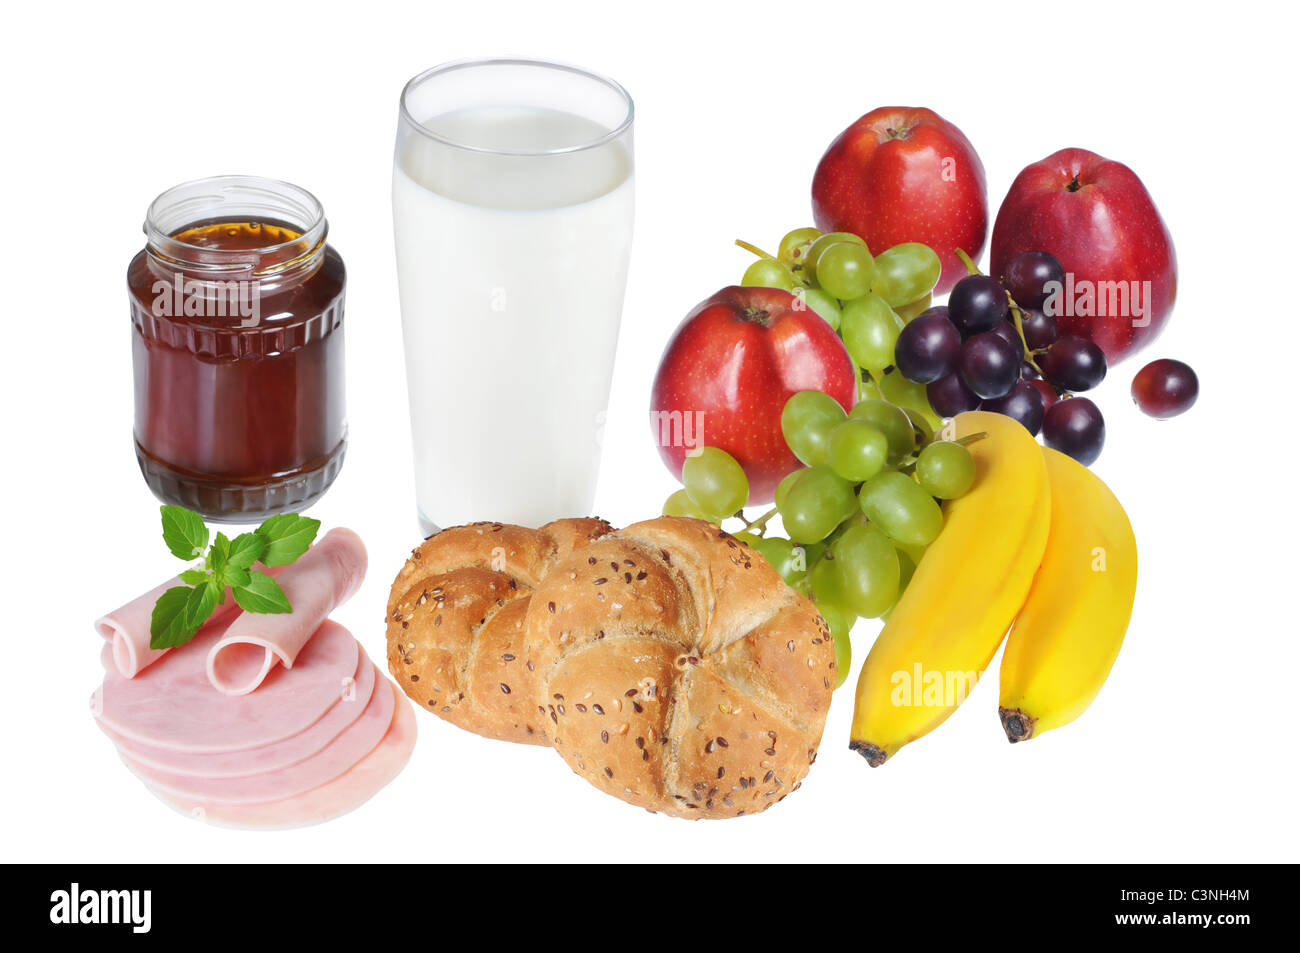 Healthy breakfast with baked goods, fruits, milk, honey and ham. Stock Photo